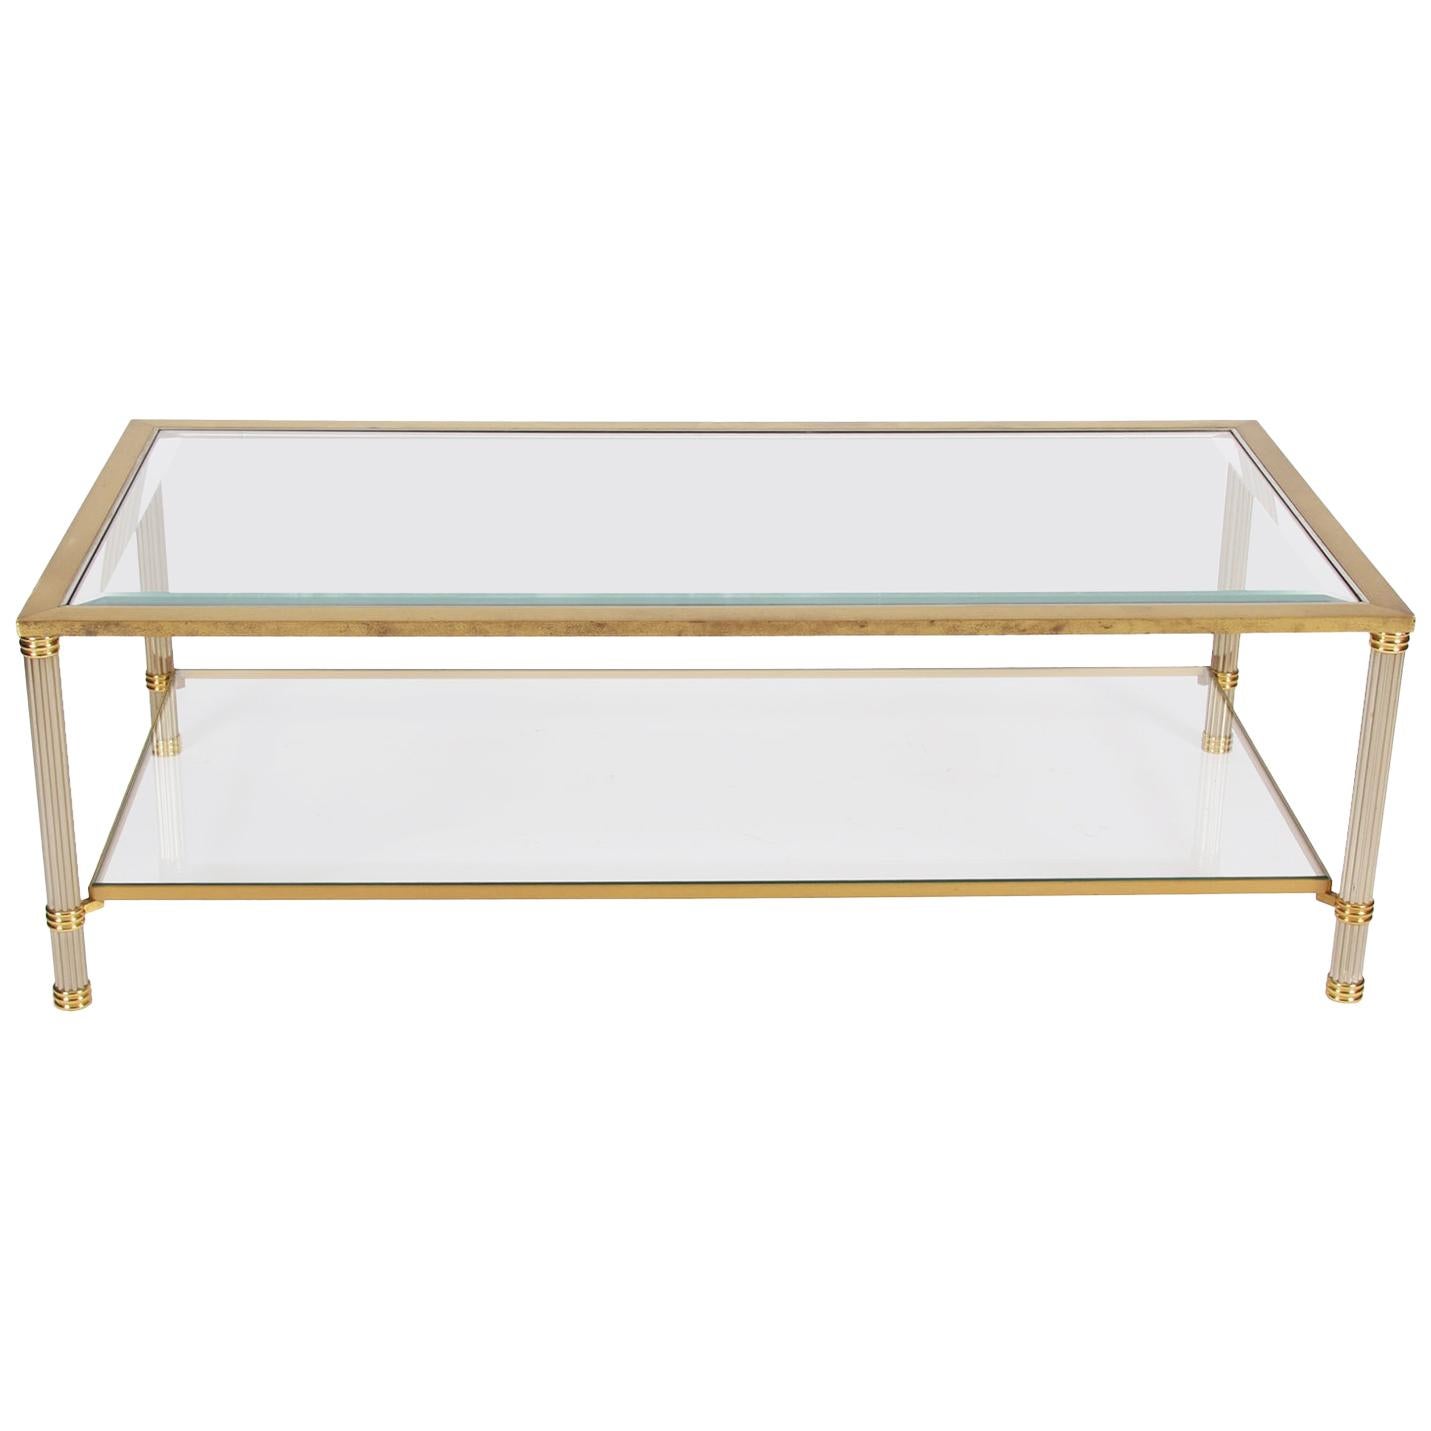 Two-Tier Brass and Glass Coffee Table